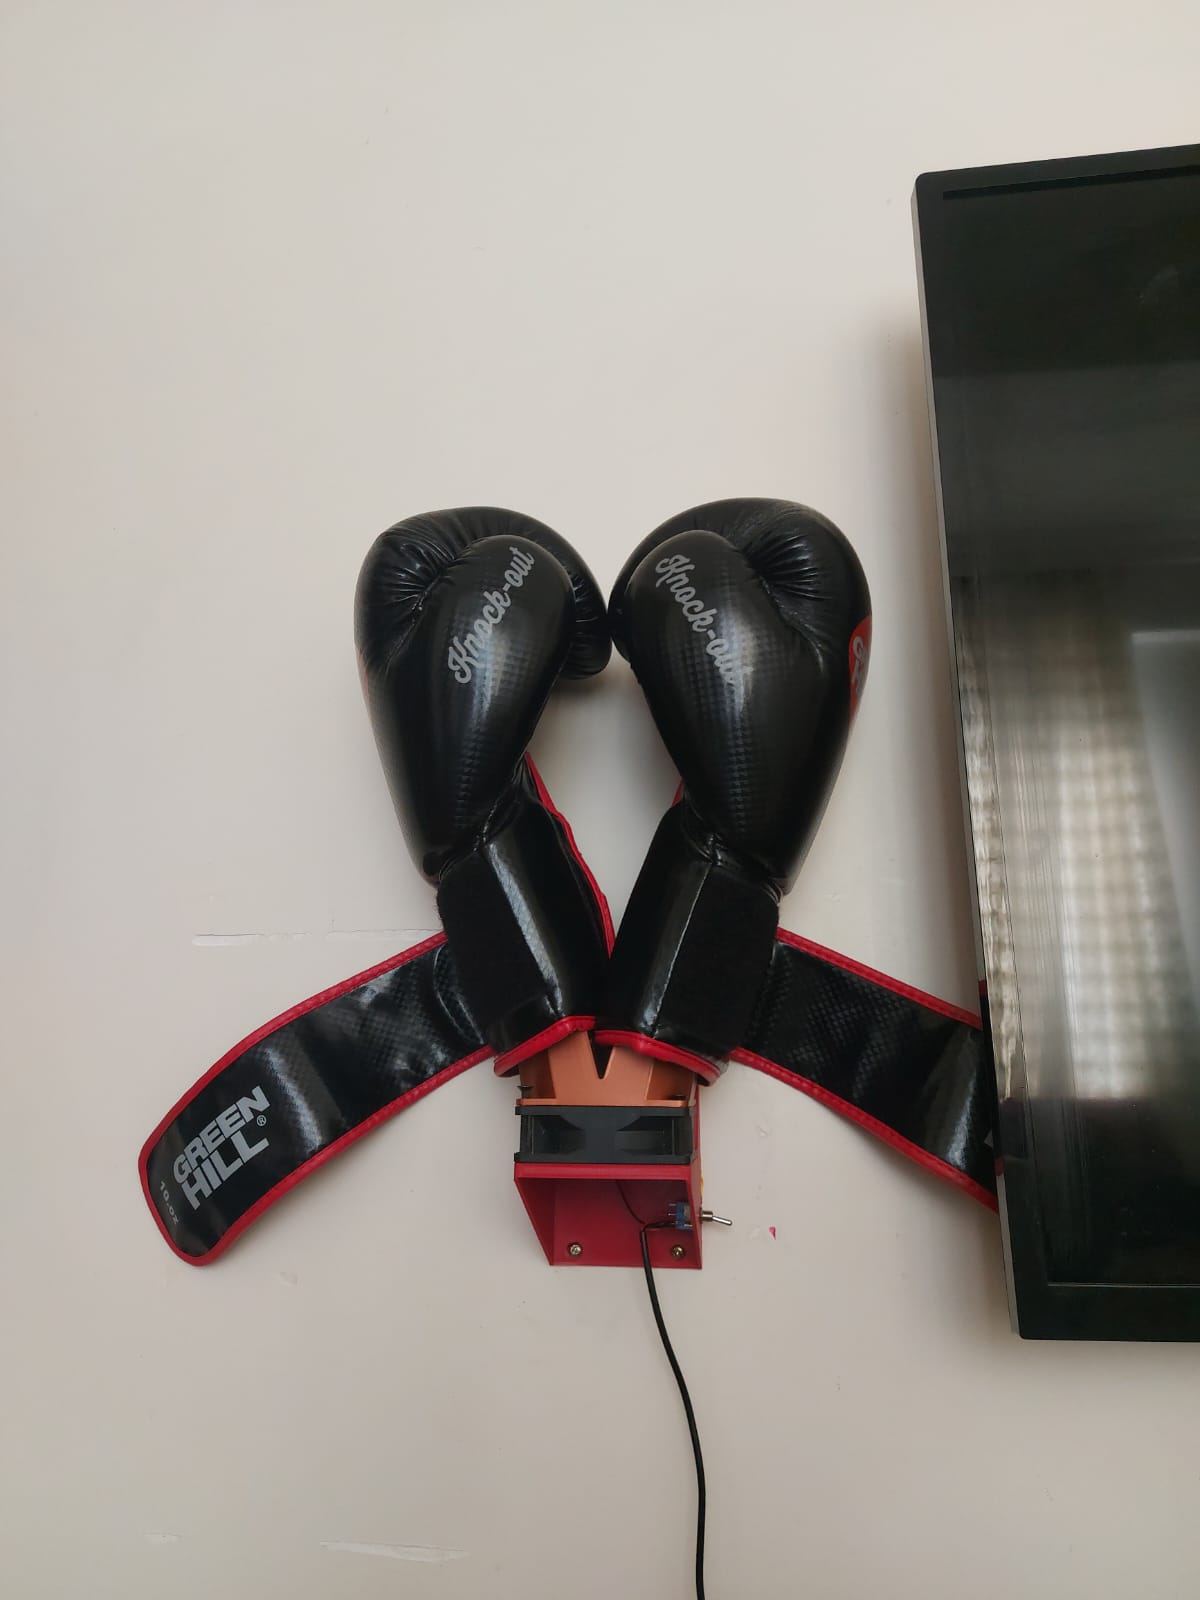 wall mounted dryer for kick boxing gloves